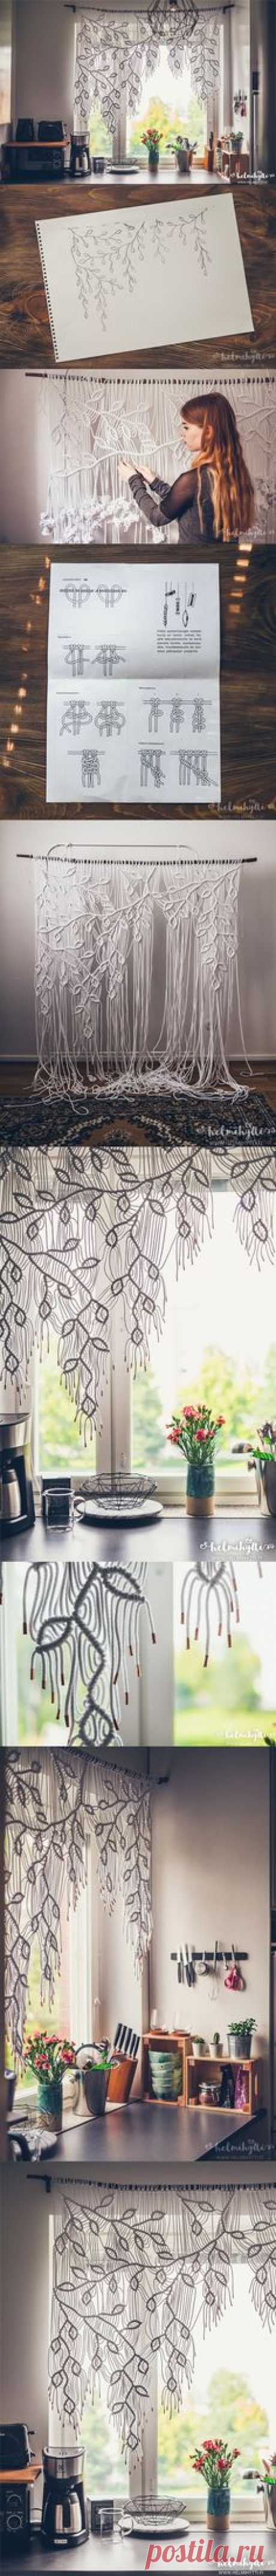 DIY macrame curtain with asymmetric pattern tutorial. Only one knot type used! Copper tape at the ends of the yarn. Original blog post &amp; instructio…